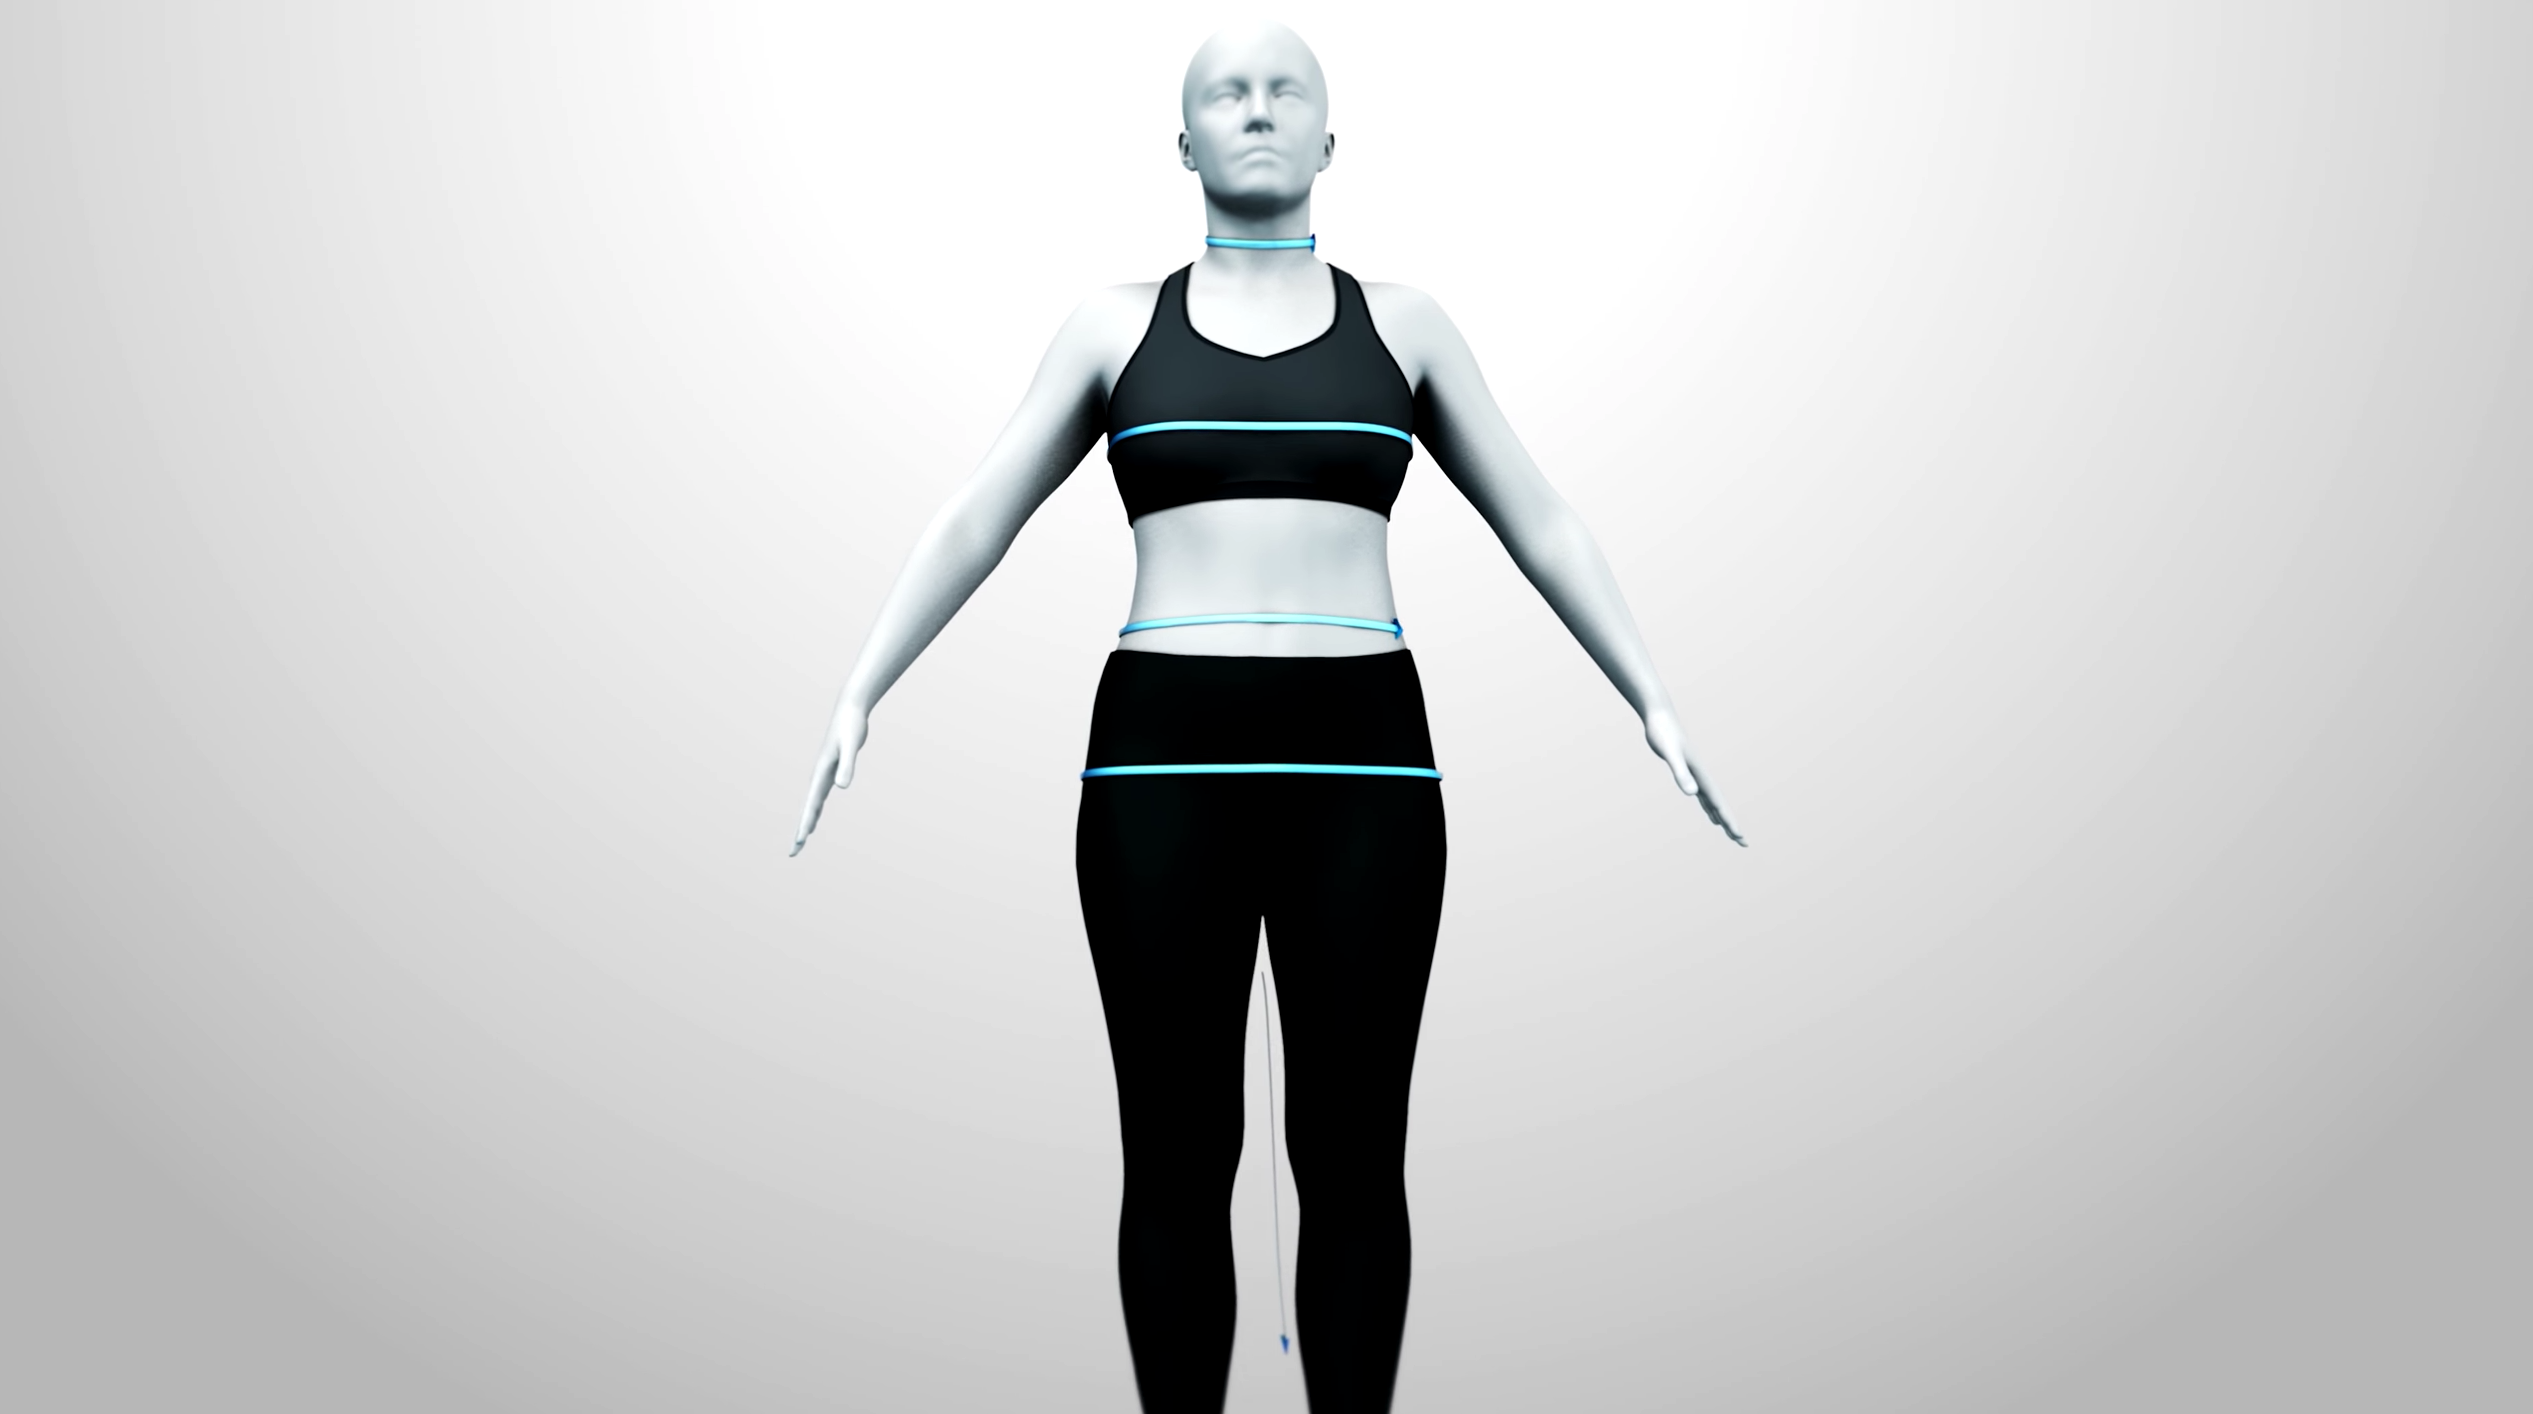 Amazon Acquires 3D Body Modeling Company That Could Be Useful For Fashion, Gaming